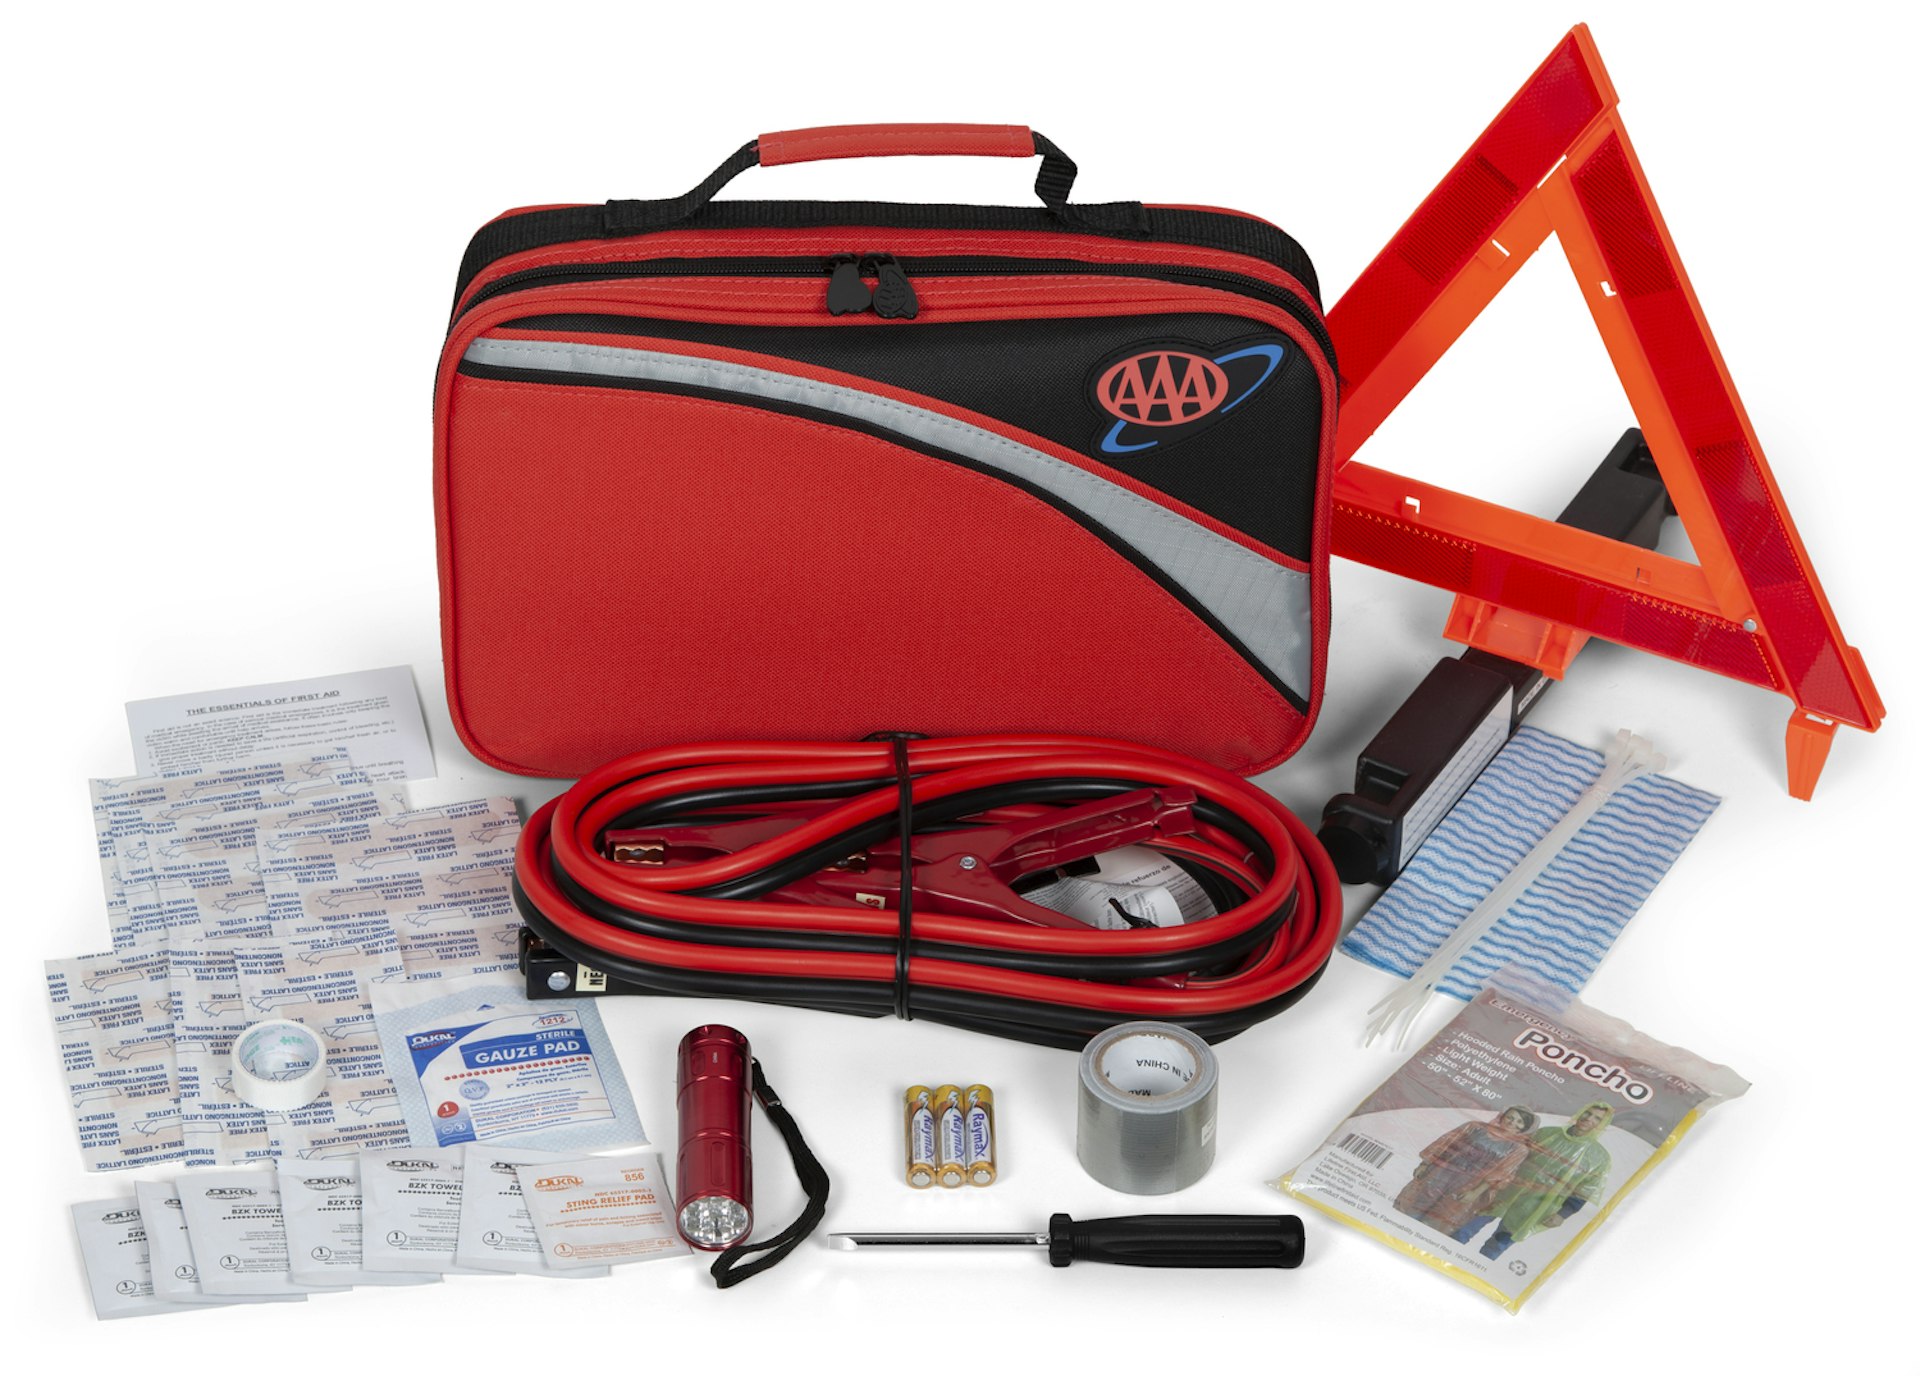 Lifeline's AAA Traveler Road kit, a red bag with jumper cables, first-aid supplies, and more